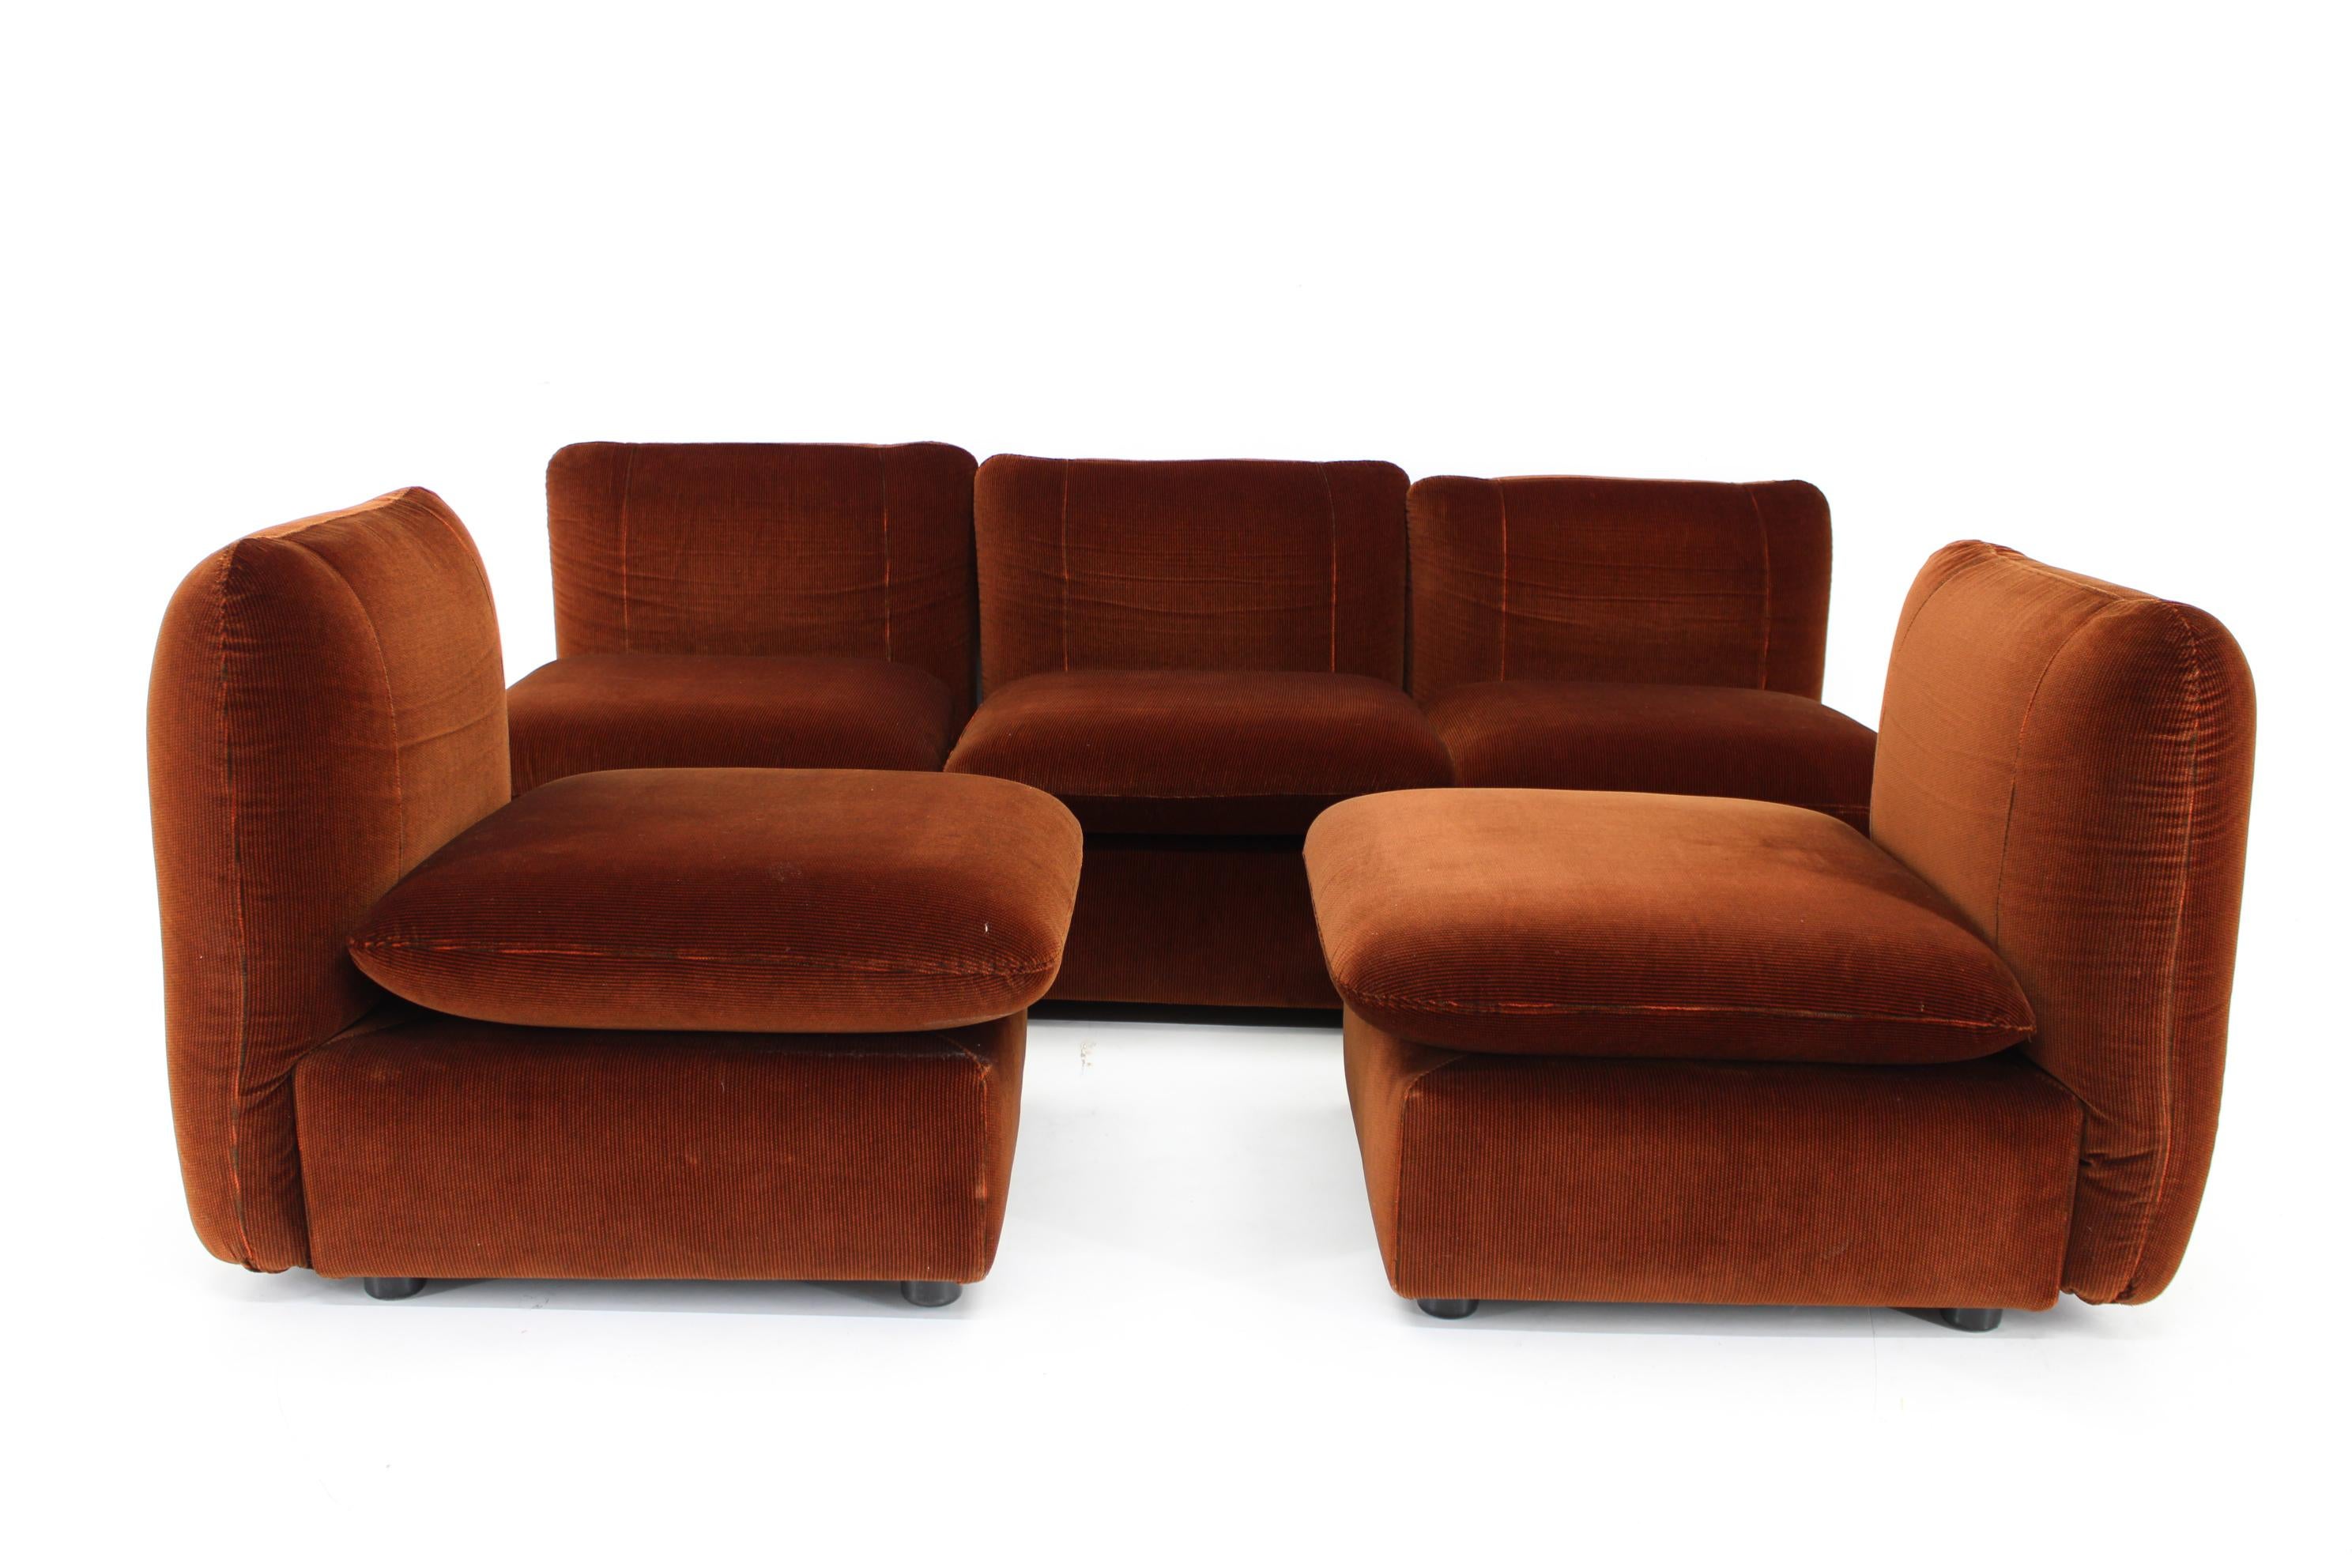 1970s Modular Sofa or Chairs, Italy For Sale 2